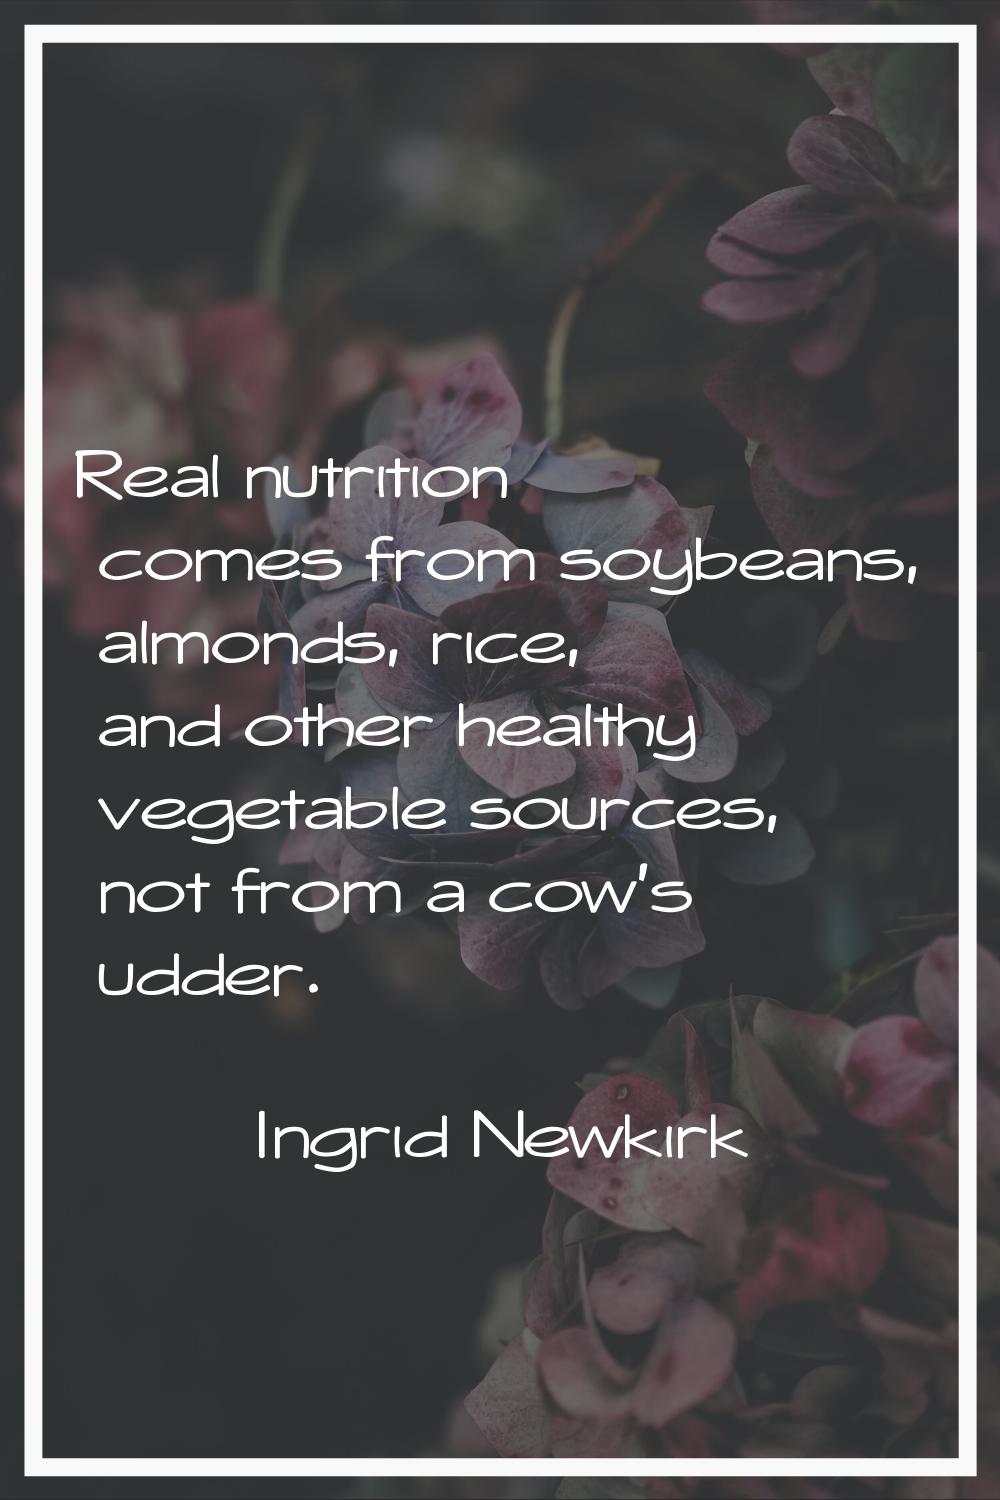 Real nutrition comes from soybeans, almonds, rice, and other healthy vegetable sources, not from a 